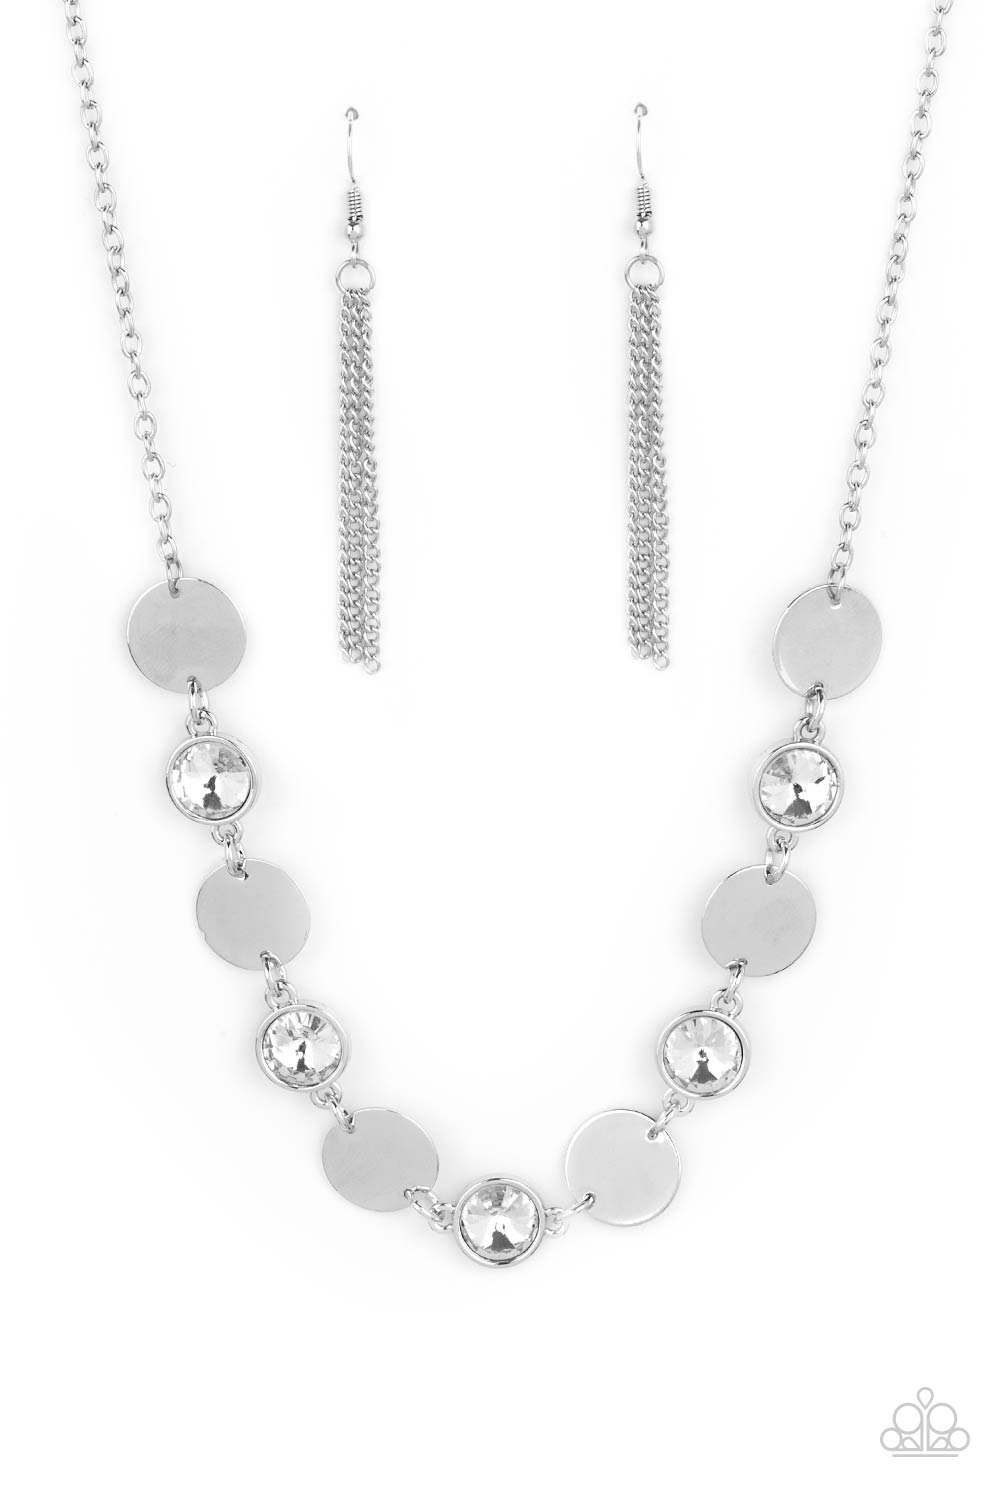 Refined Reflections White Necklace - Paparazzi Accessories  Shiny silver discs and oversized glassy white gems delicately link below the collar, creating a sparkly statement piece. Features an adjustable clasp closure.  All Paparazzi Accessories are lead free and nickel free!  Sold as one individual necklace. Includes one pair of matching earrings.